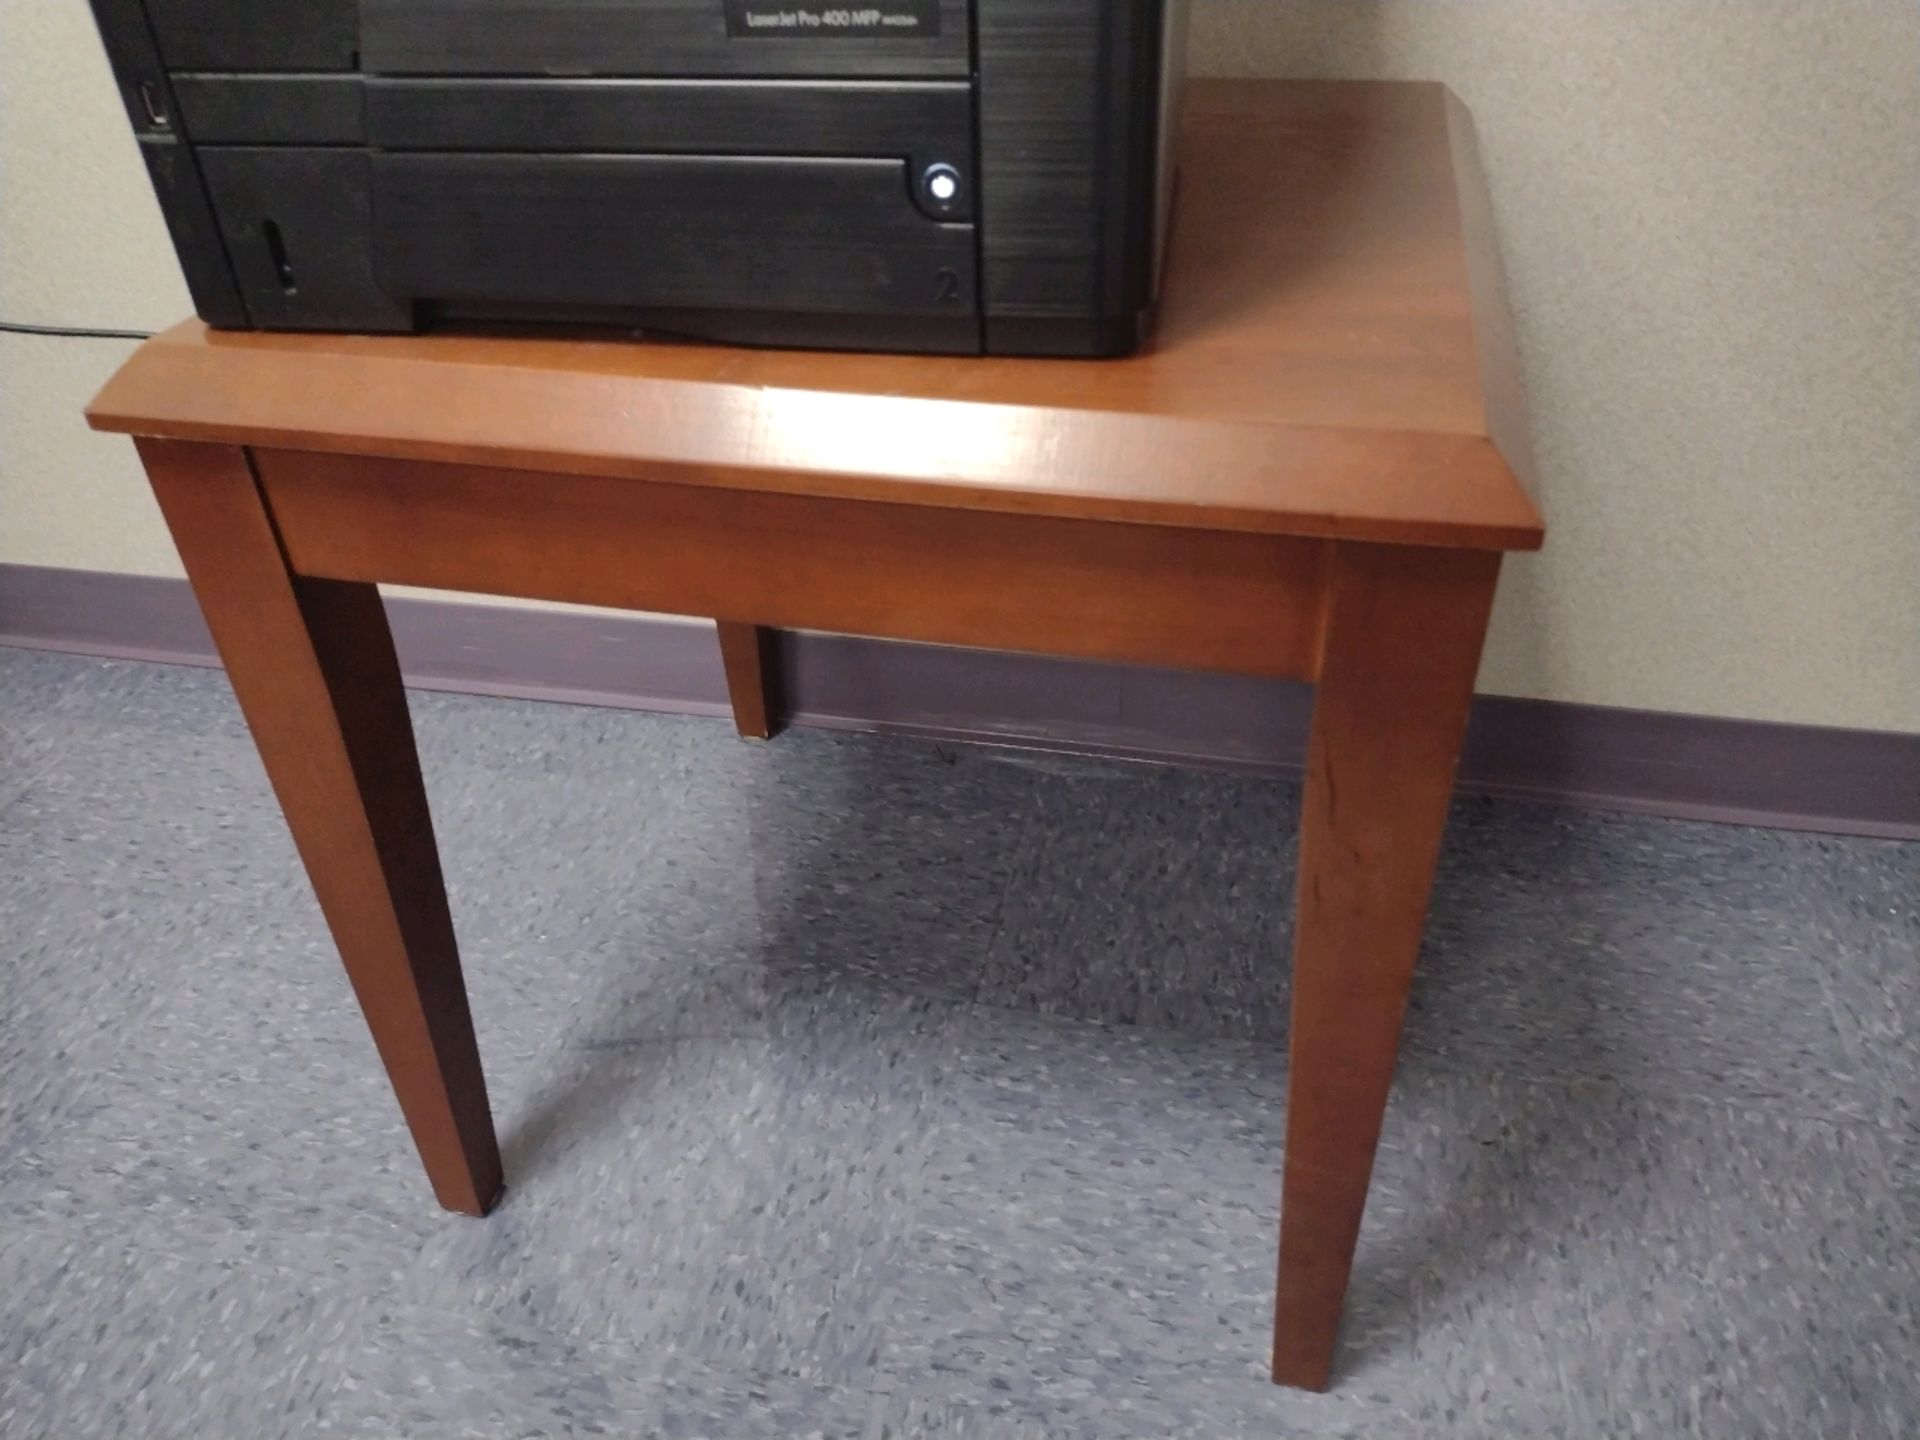 OFFICE TO INCLUDE: QTY. (2) DESKS, CHAIRS, END TABLE, 2-DOOR CABINET, FILE CABINET (IT EQUIPMENT NOT - Image 5 of 5